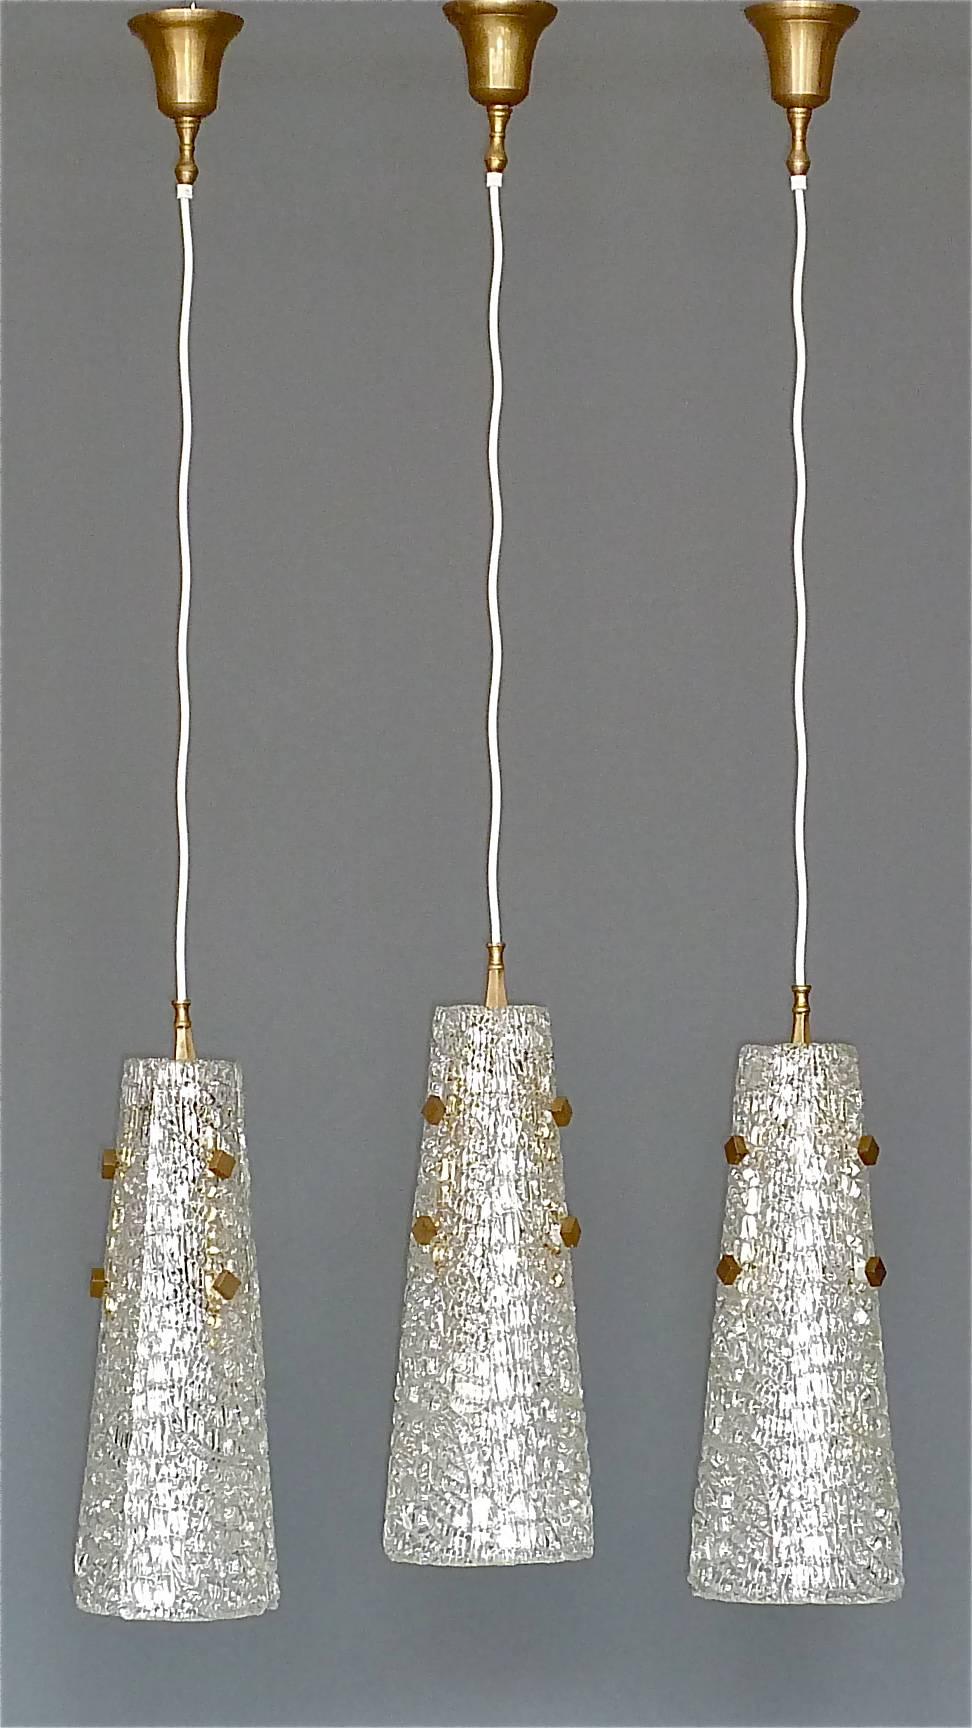 Rare and early set of three J.T. Kalmar midcentury pendant lamps of textured Murano ice glass, Austria, circa 1950s. The large lights are made of three glass petals forming a cone shade and beautiful patinated brass details. One pendant takes three